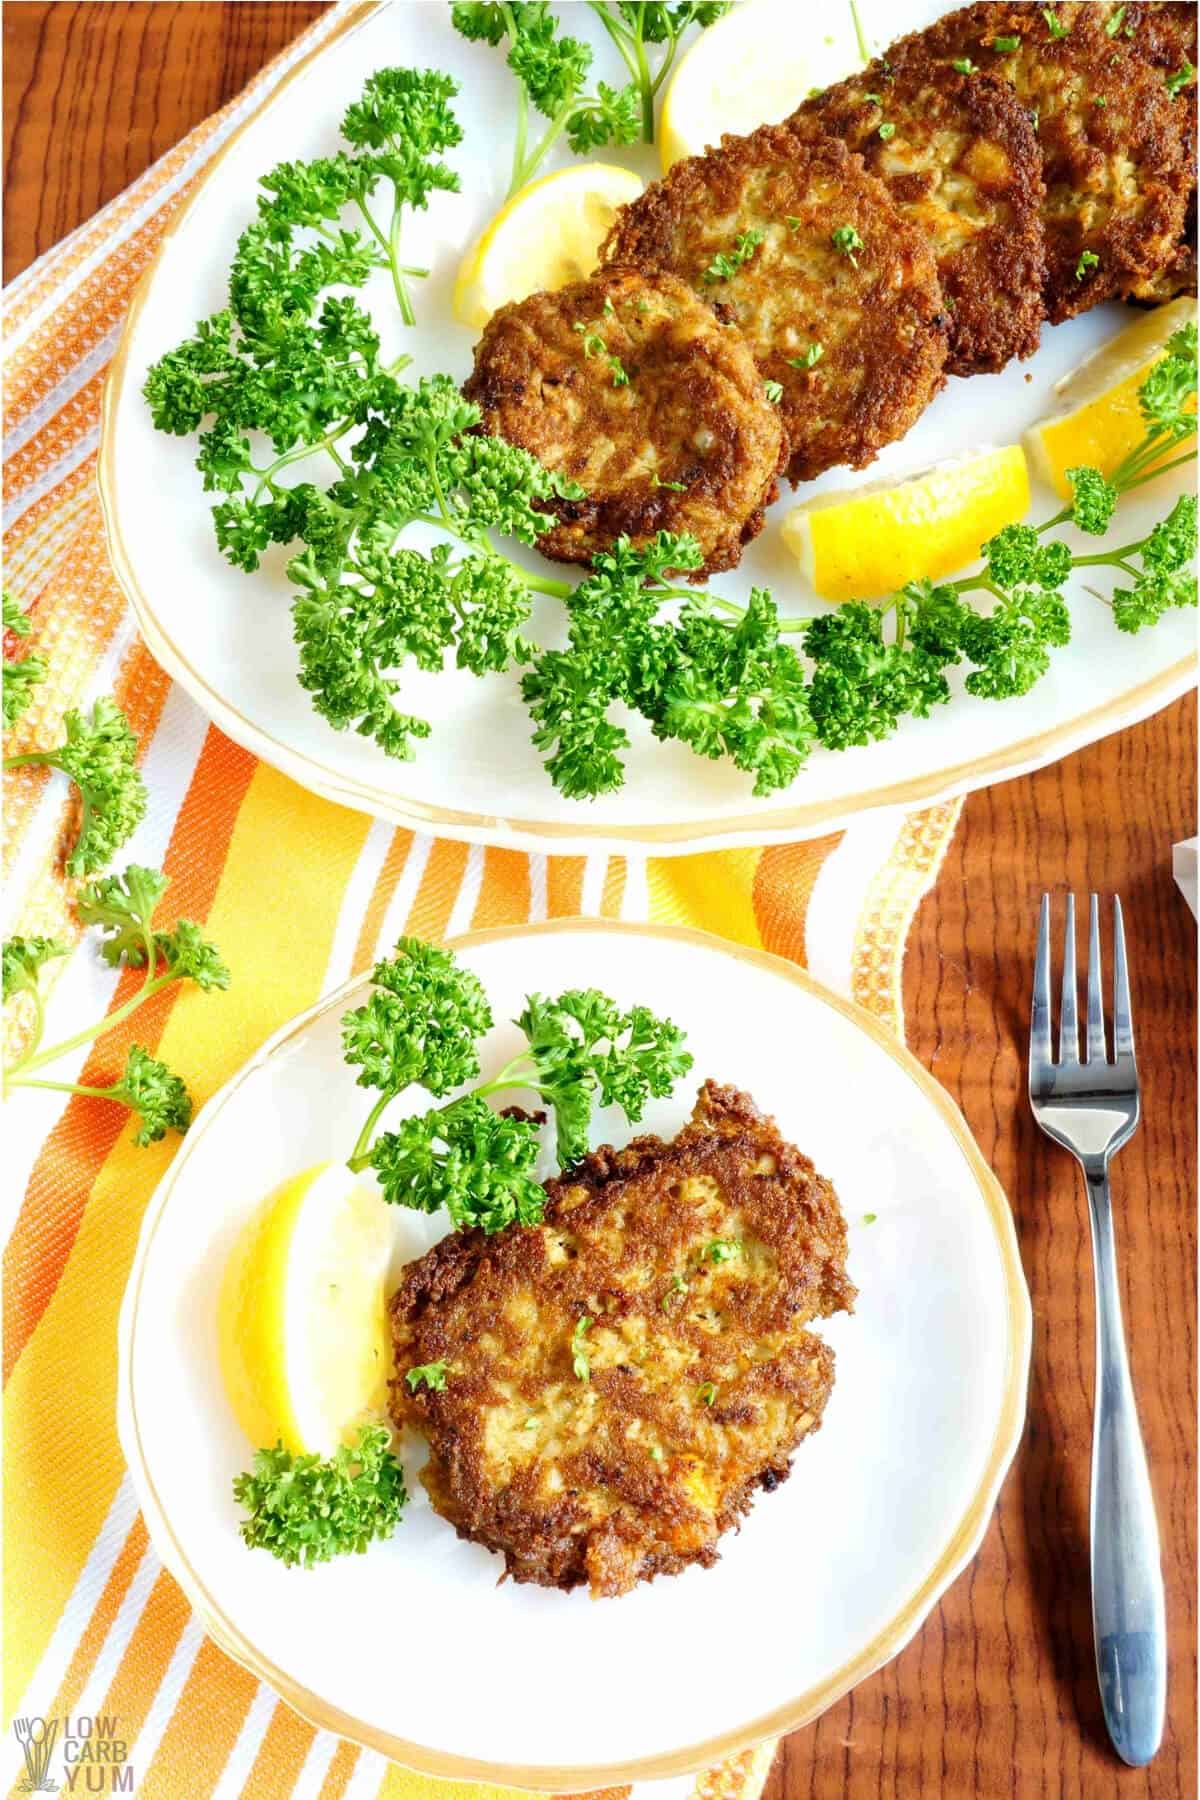 keto crab cakes are made with pork rinds for breading